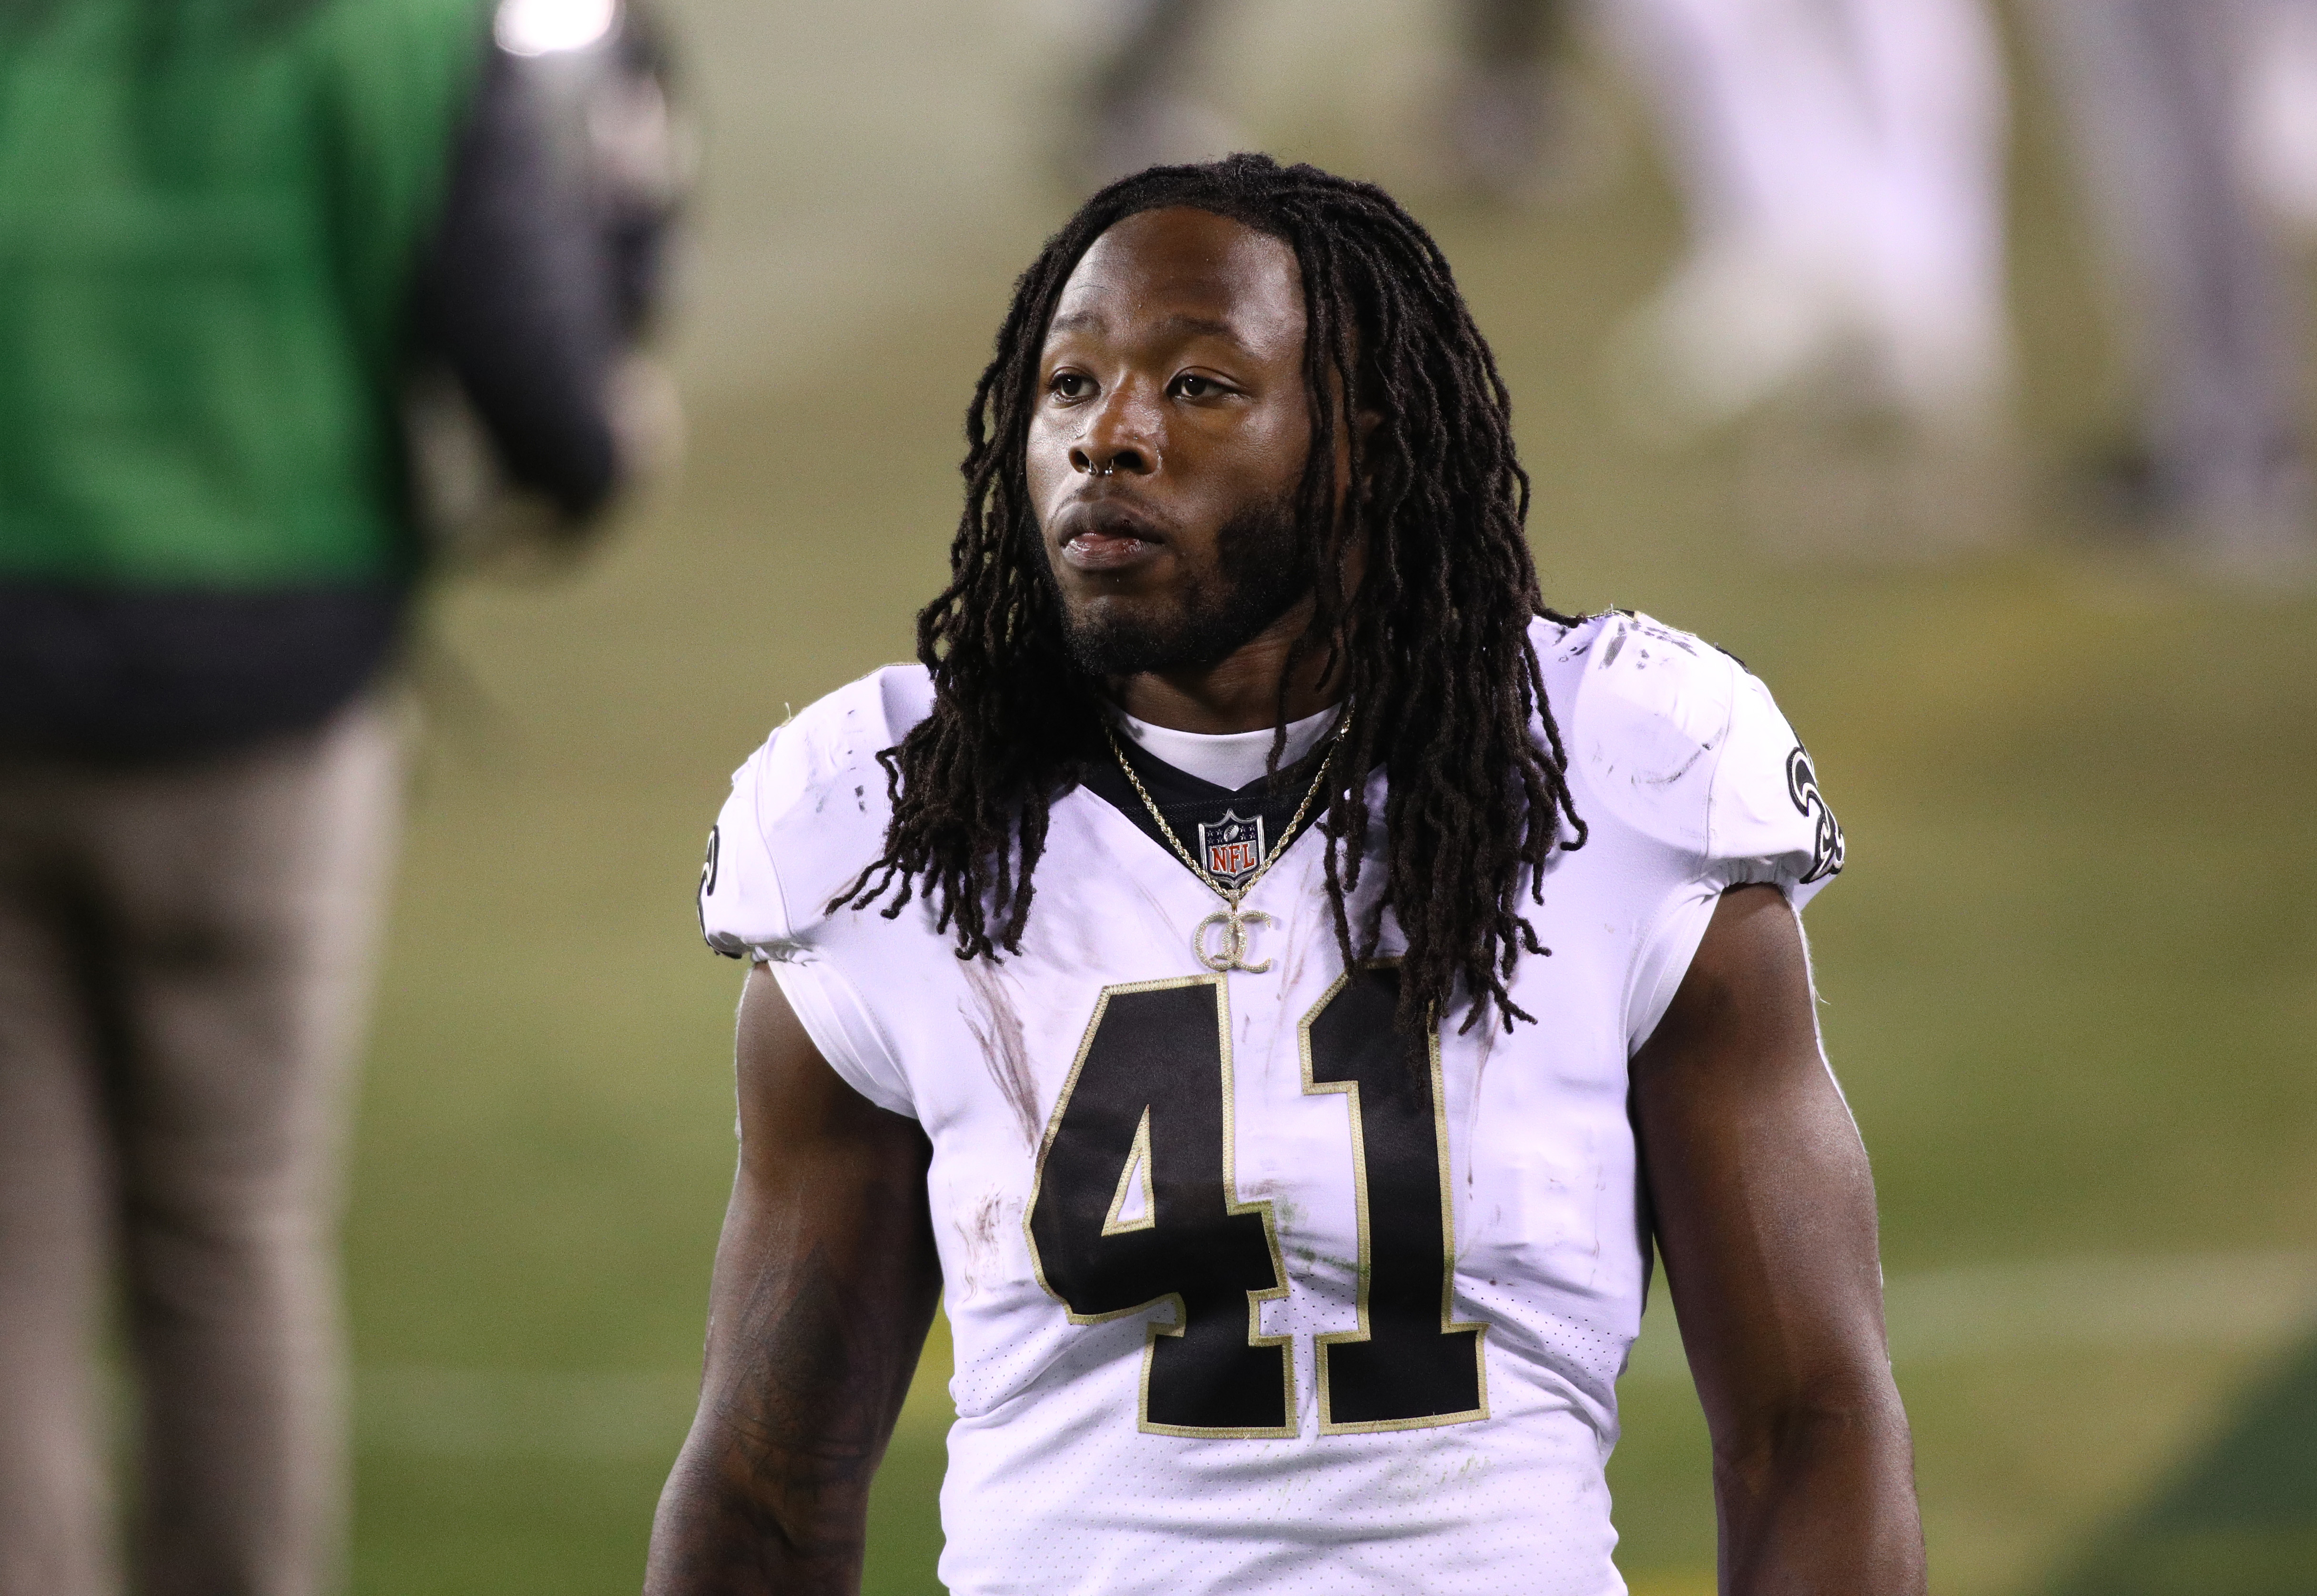 New Orleans Saints running back Alvin Kamara is consistently one of the top offensive threats in the NFL. | Kyle Ross/Icon Sportswire via Getty Images